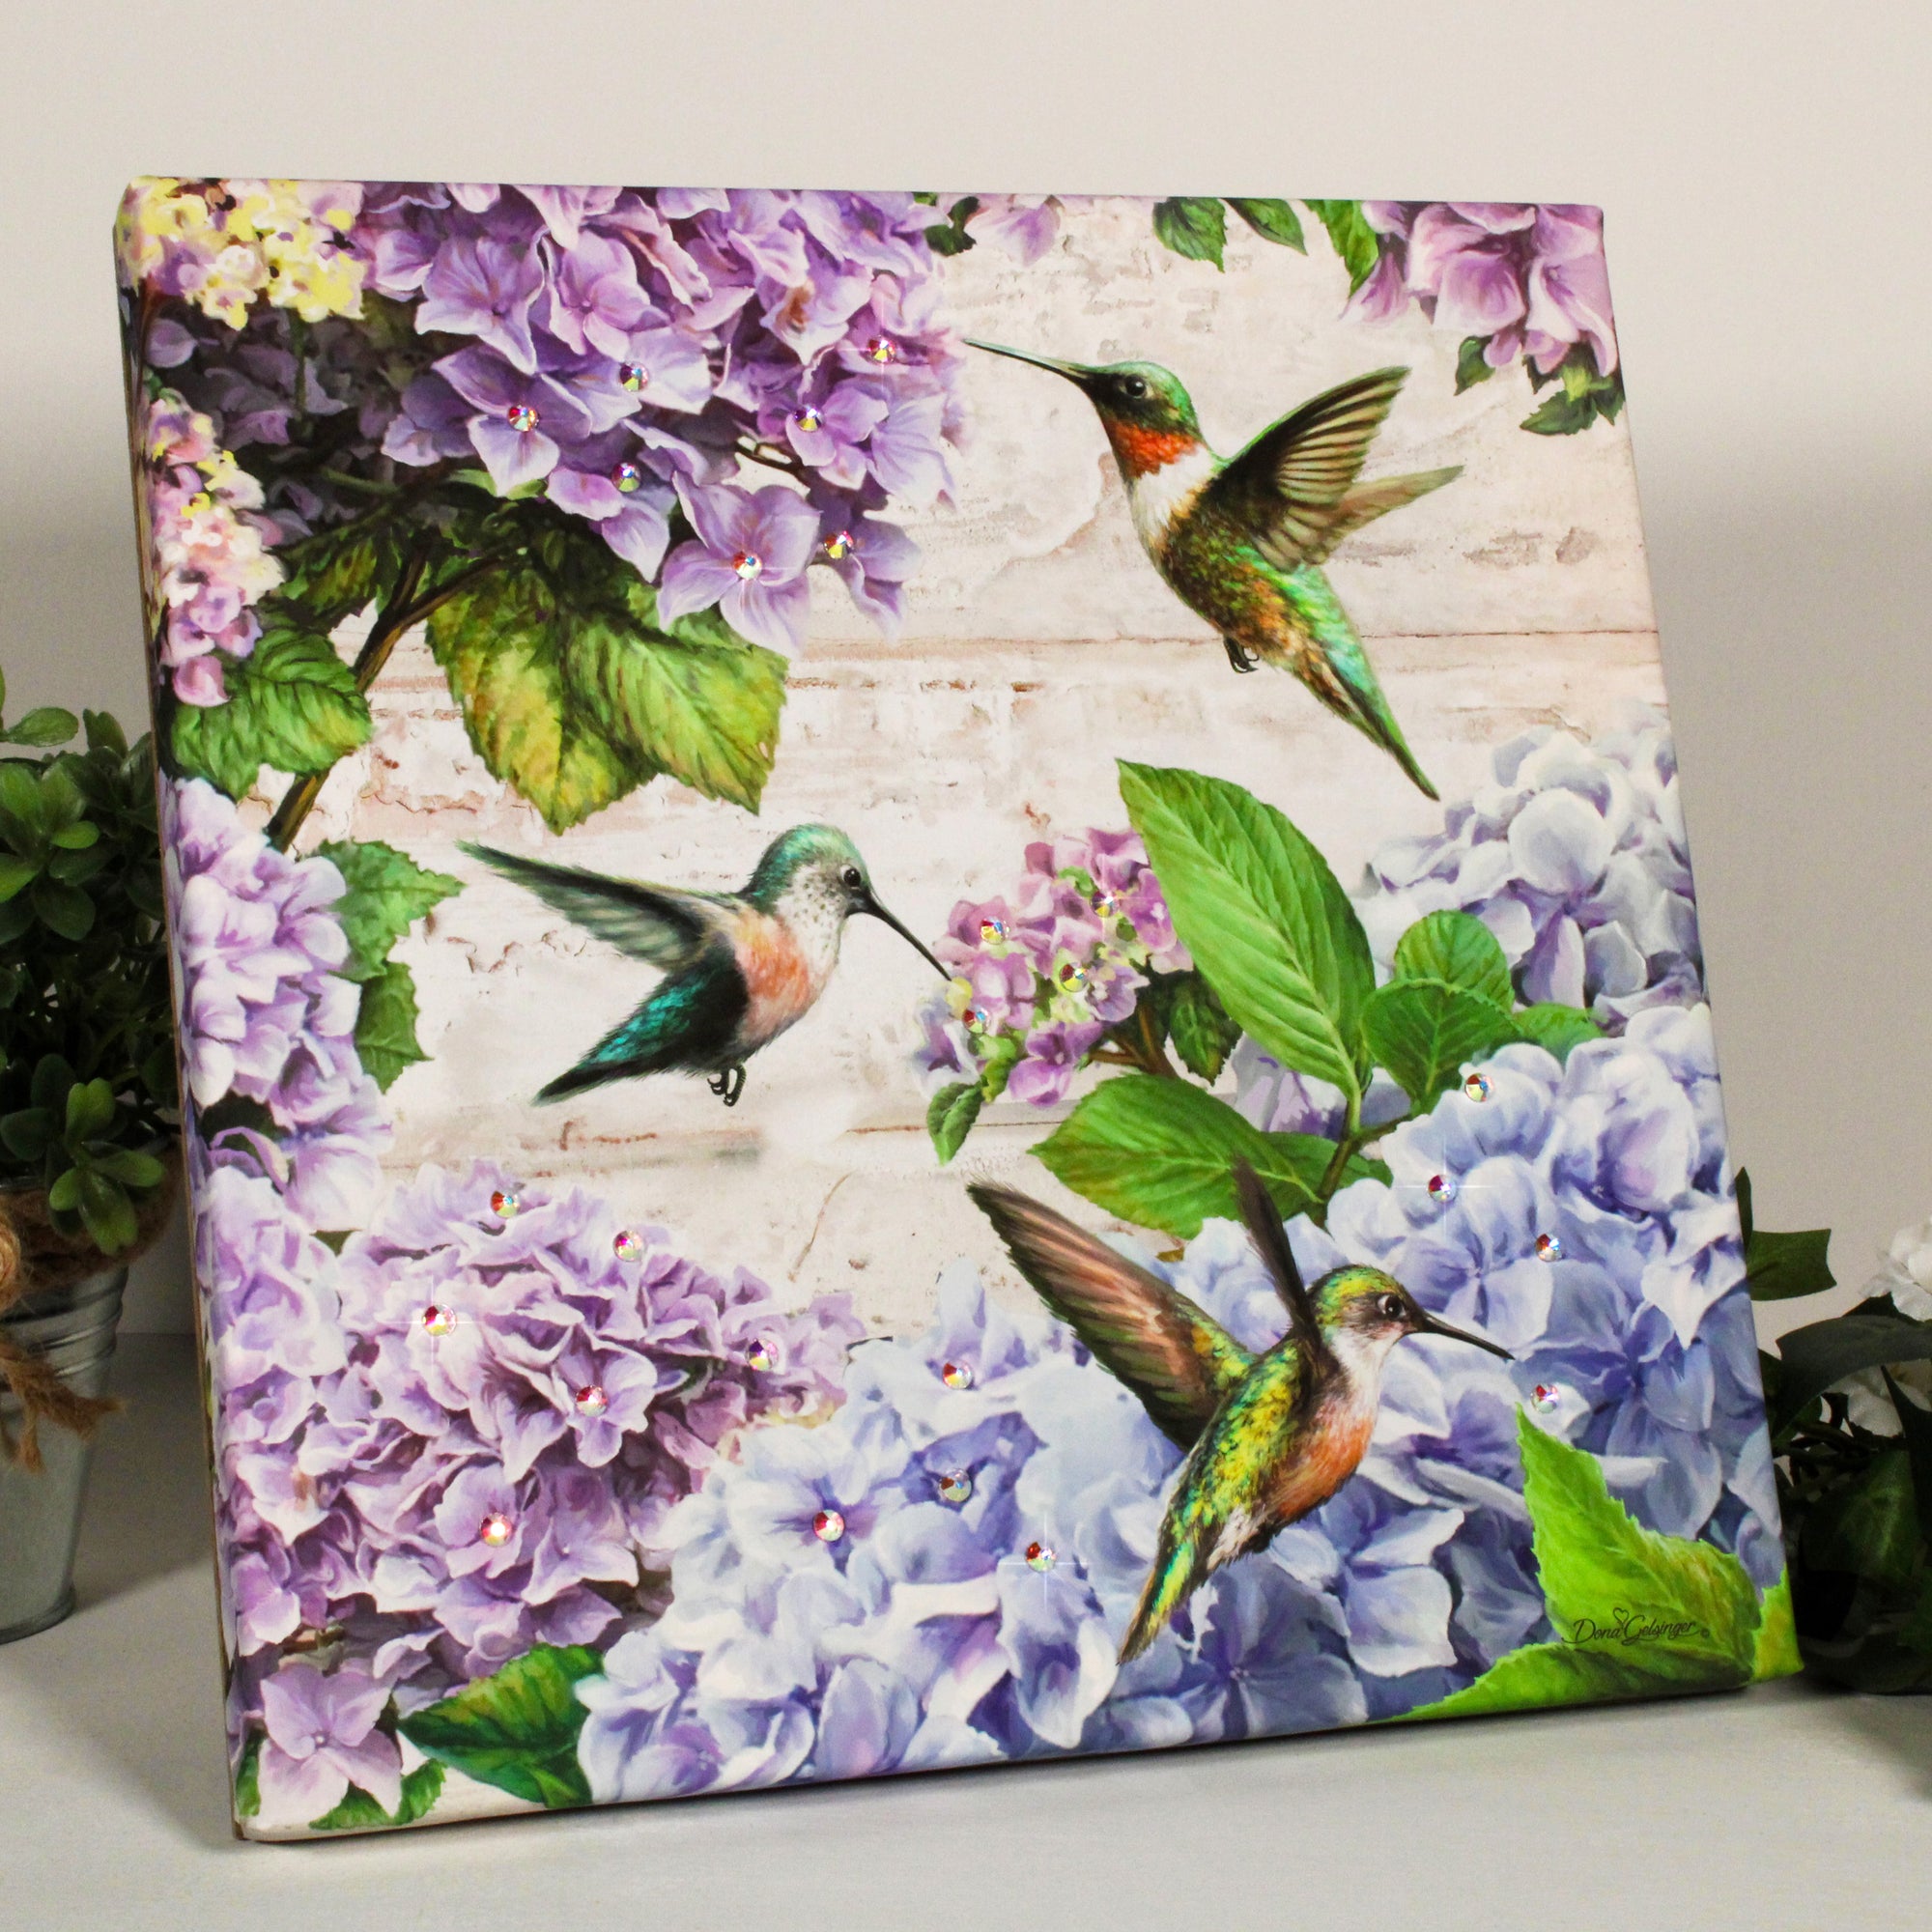 This print captures the graceful elegance of hummingbirds as they delicately sip nectar from vibrant purple and blue hydrangeas, creating a breathtaking scene of natural wonder.